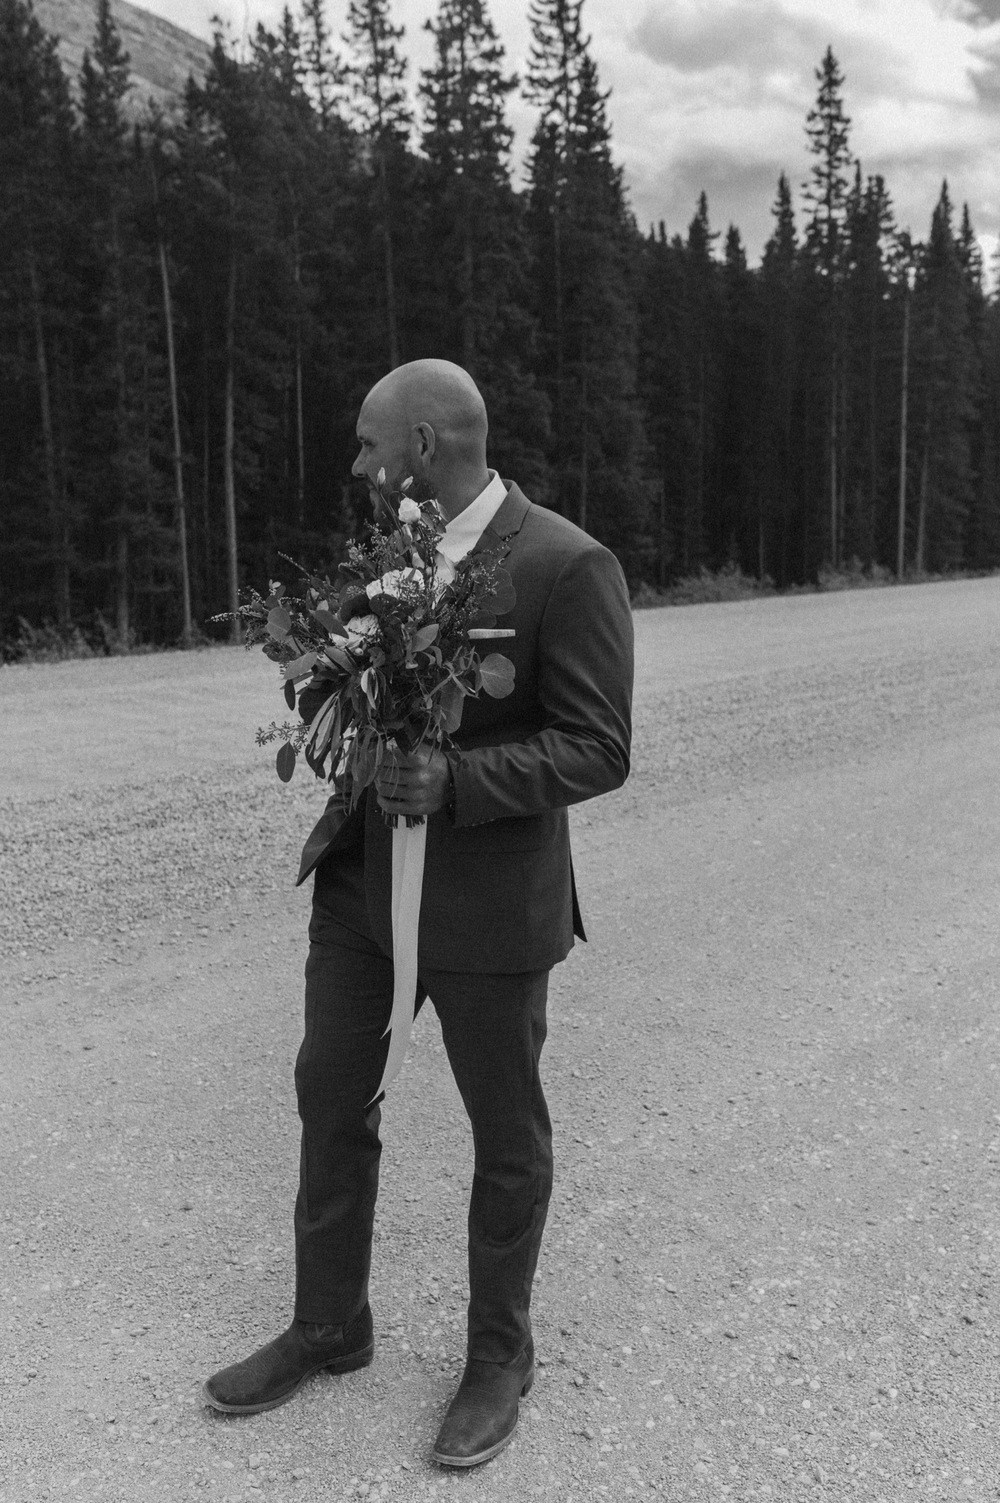 The groom waiting for his badass bride to make their way together to the ceremony in Kananaskis Alberta